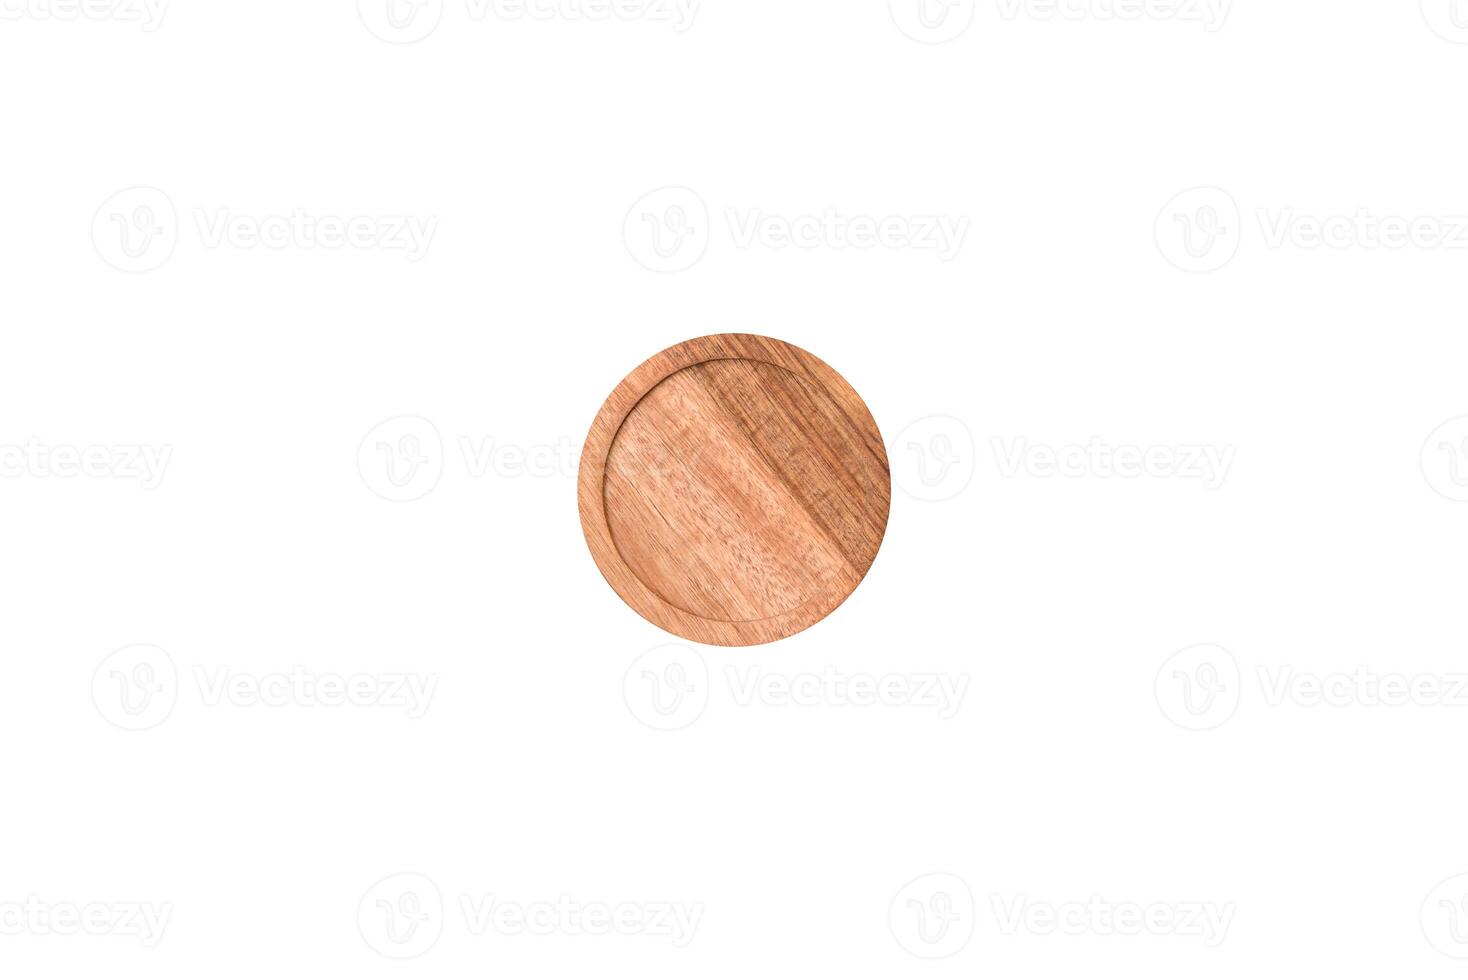 Empty wooden cutting board on a light texture background photo